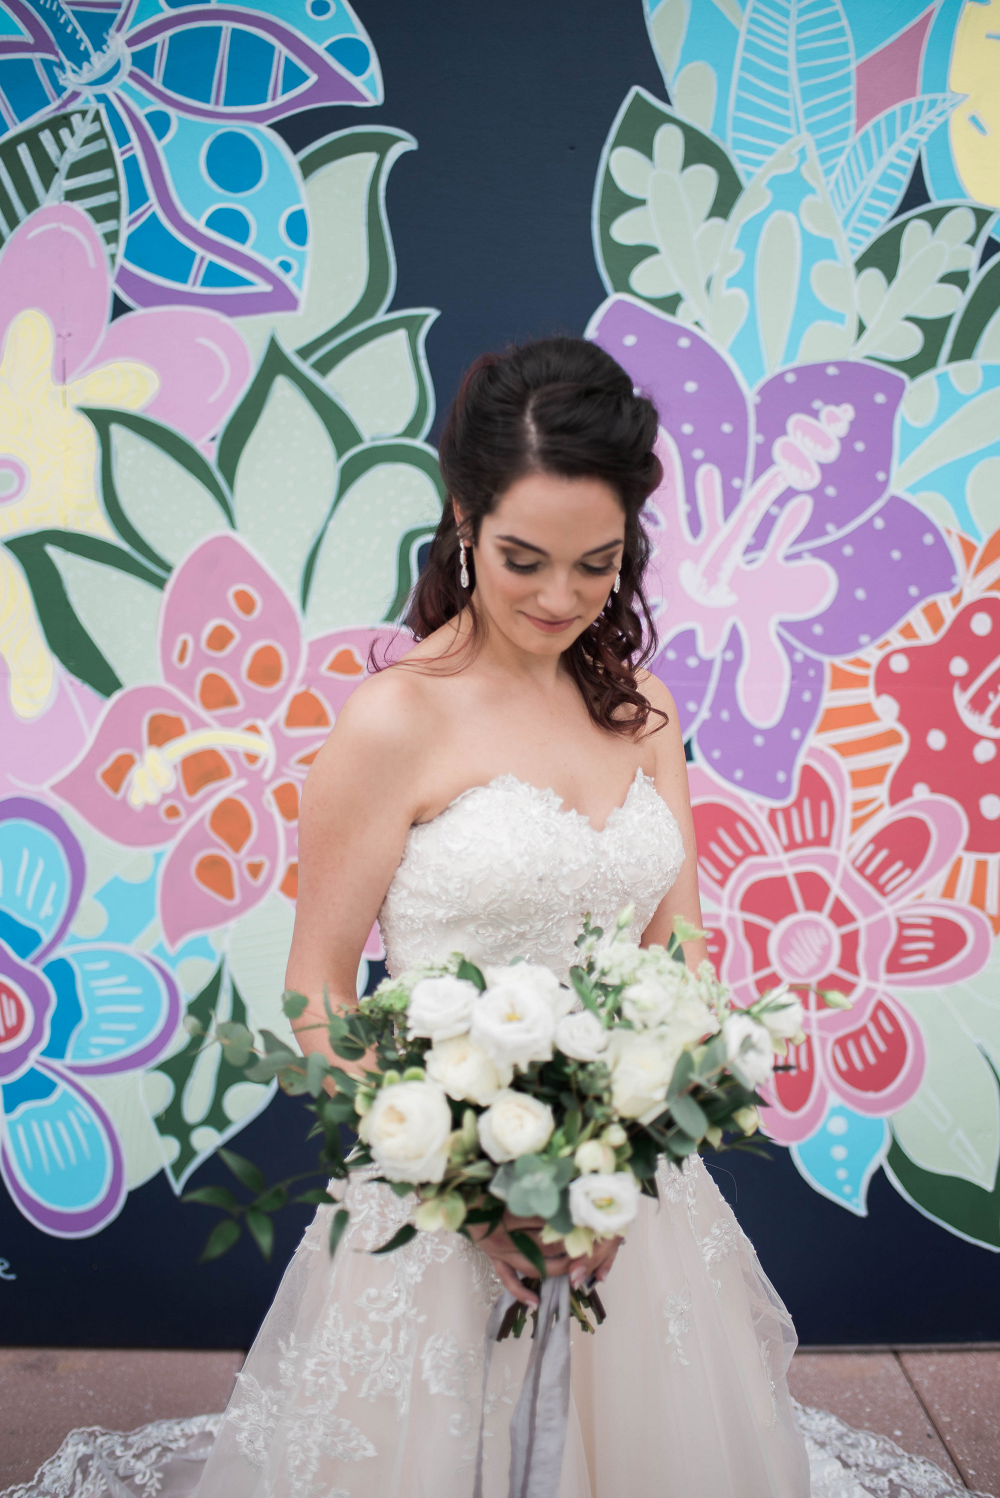 Bride in Front of Colorful Mural